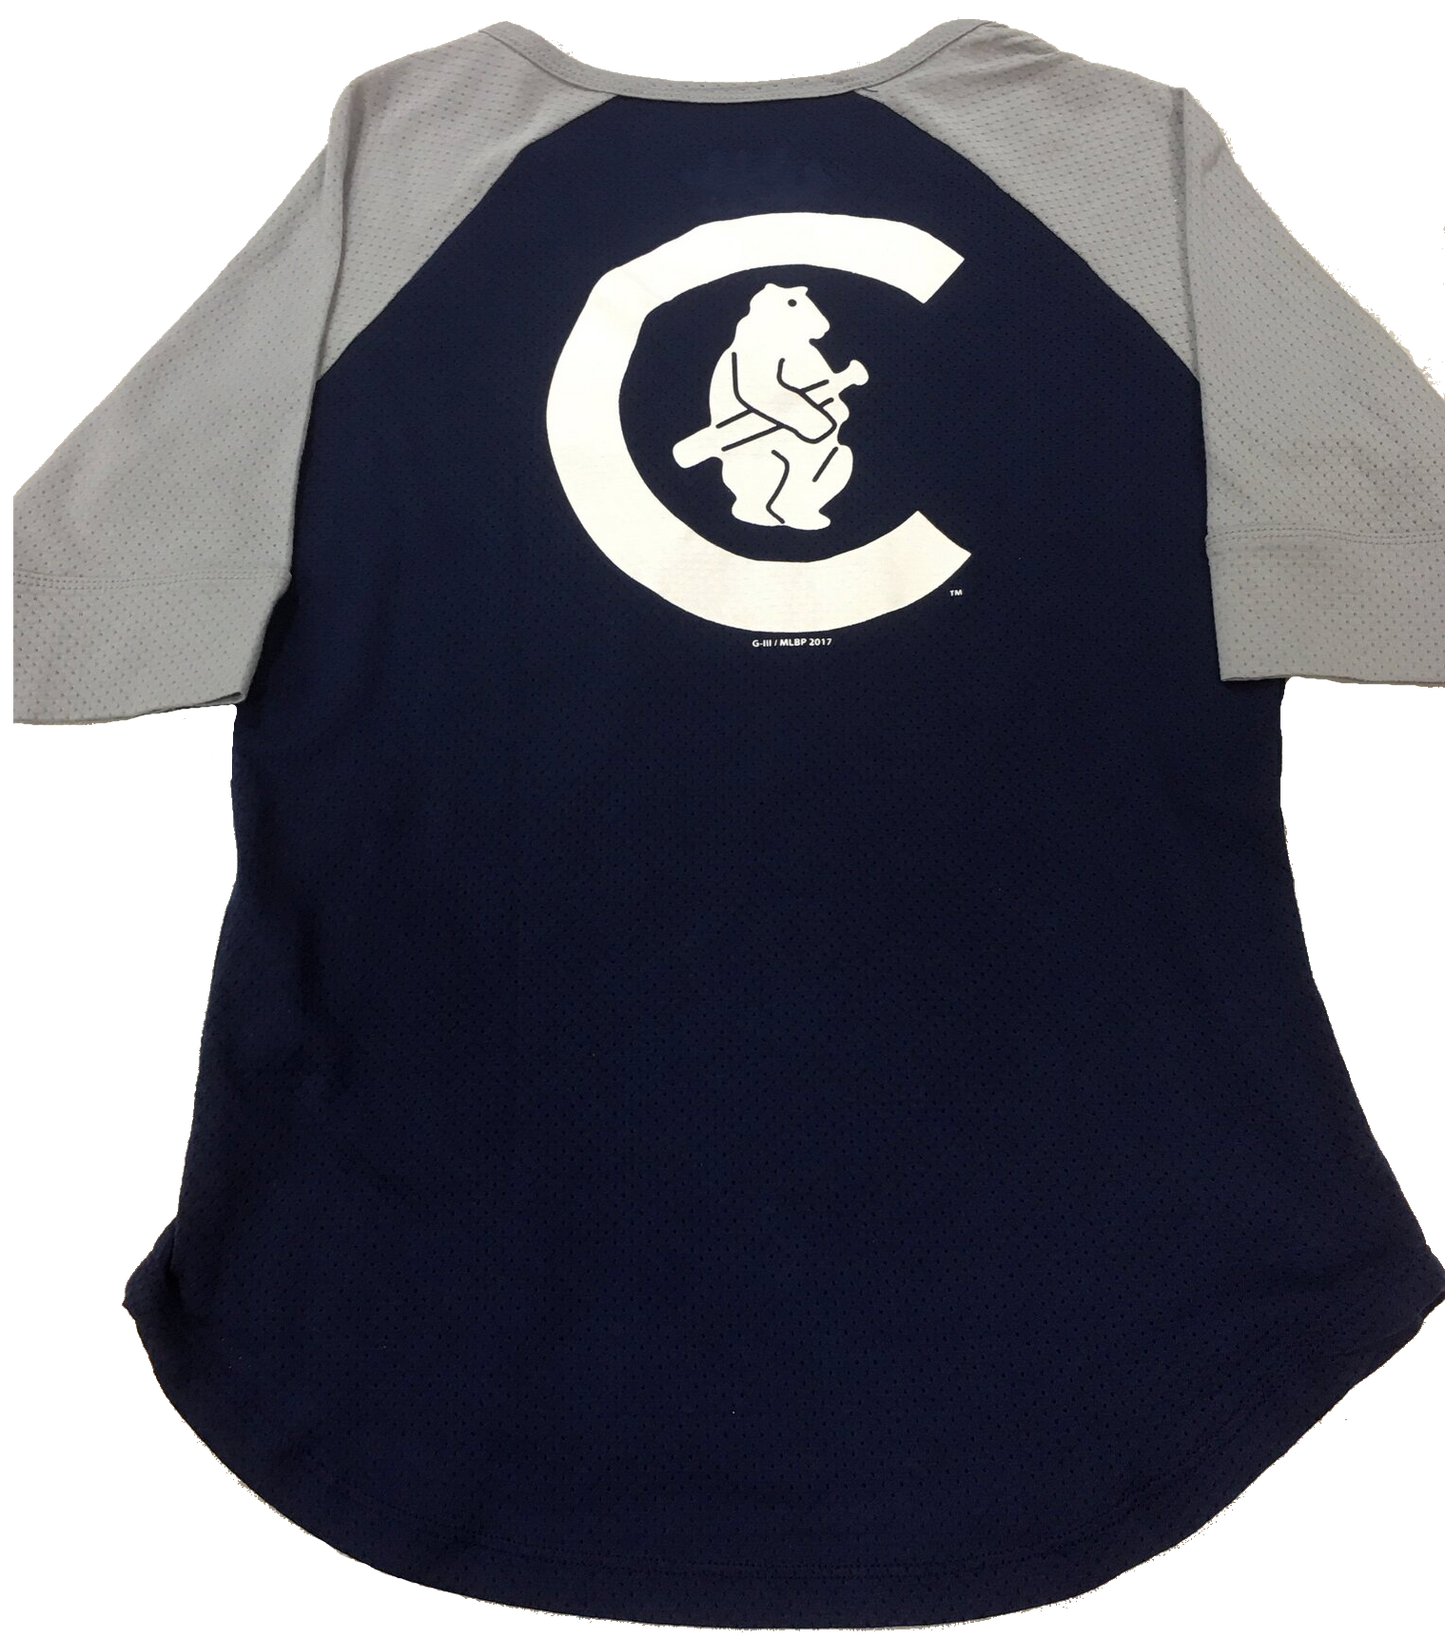 Women’s Chicago Cubs Navy/Gray Perfect Game Top